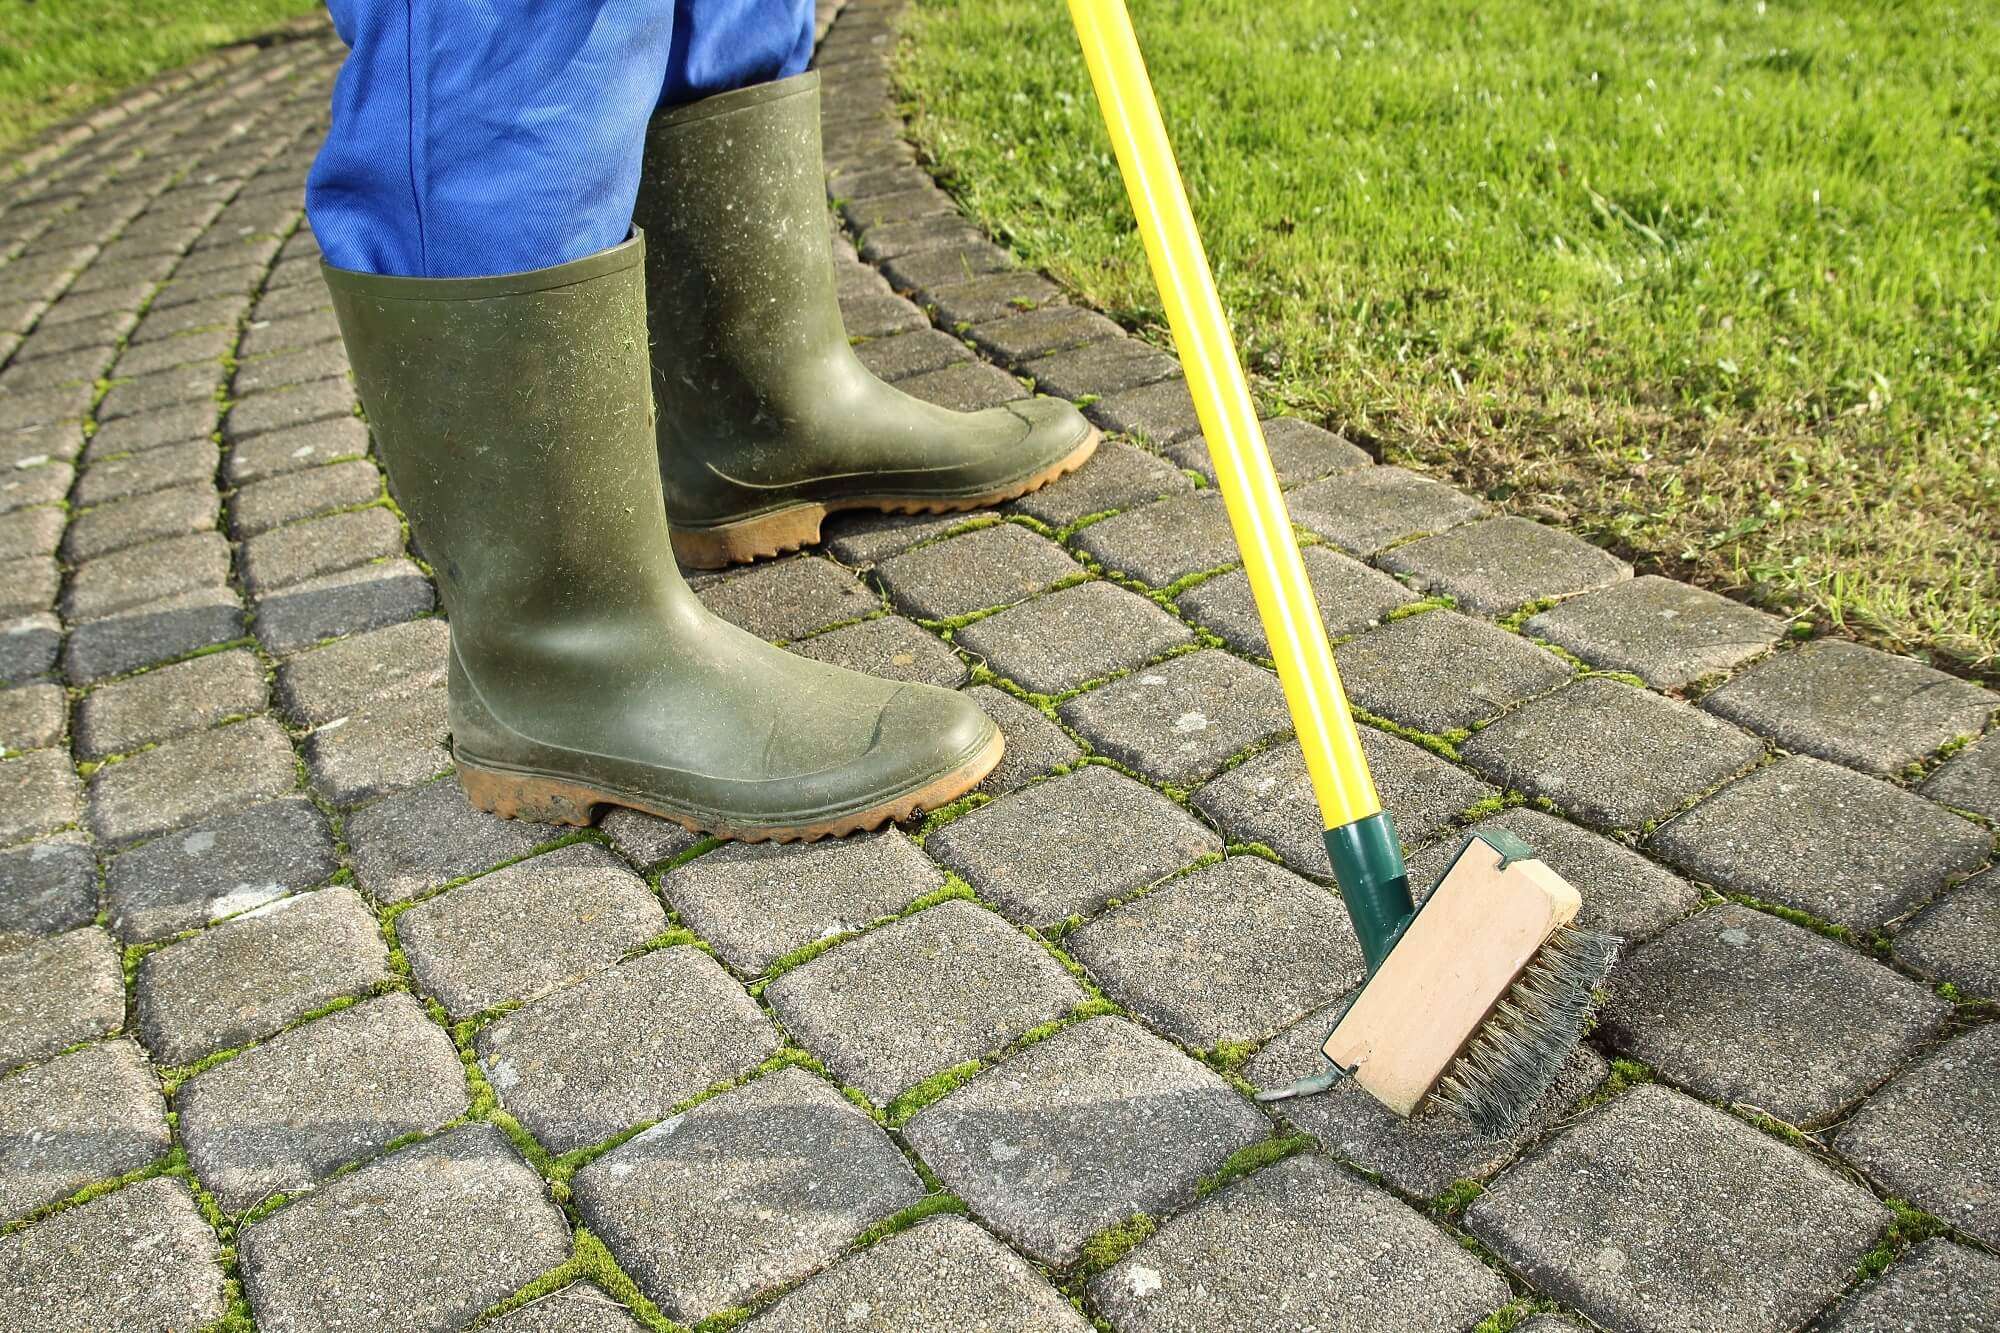 How to Clean Patio Pavers and Keep Them That Way